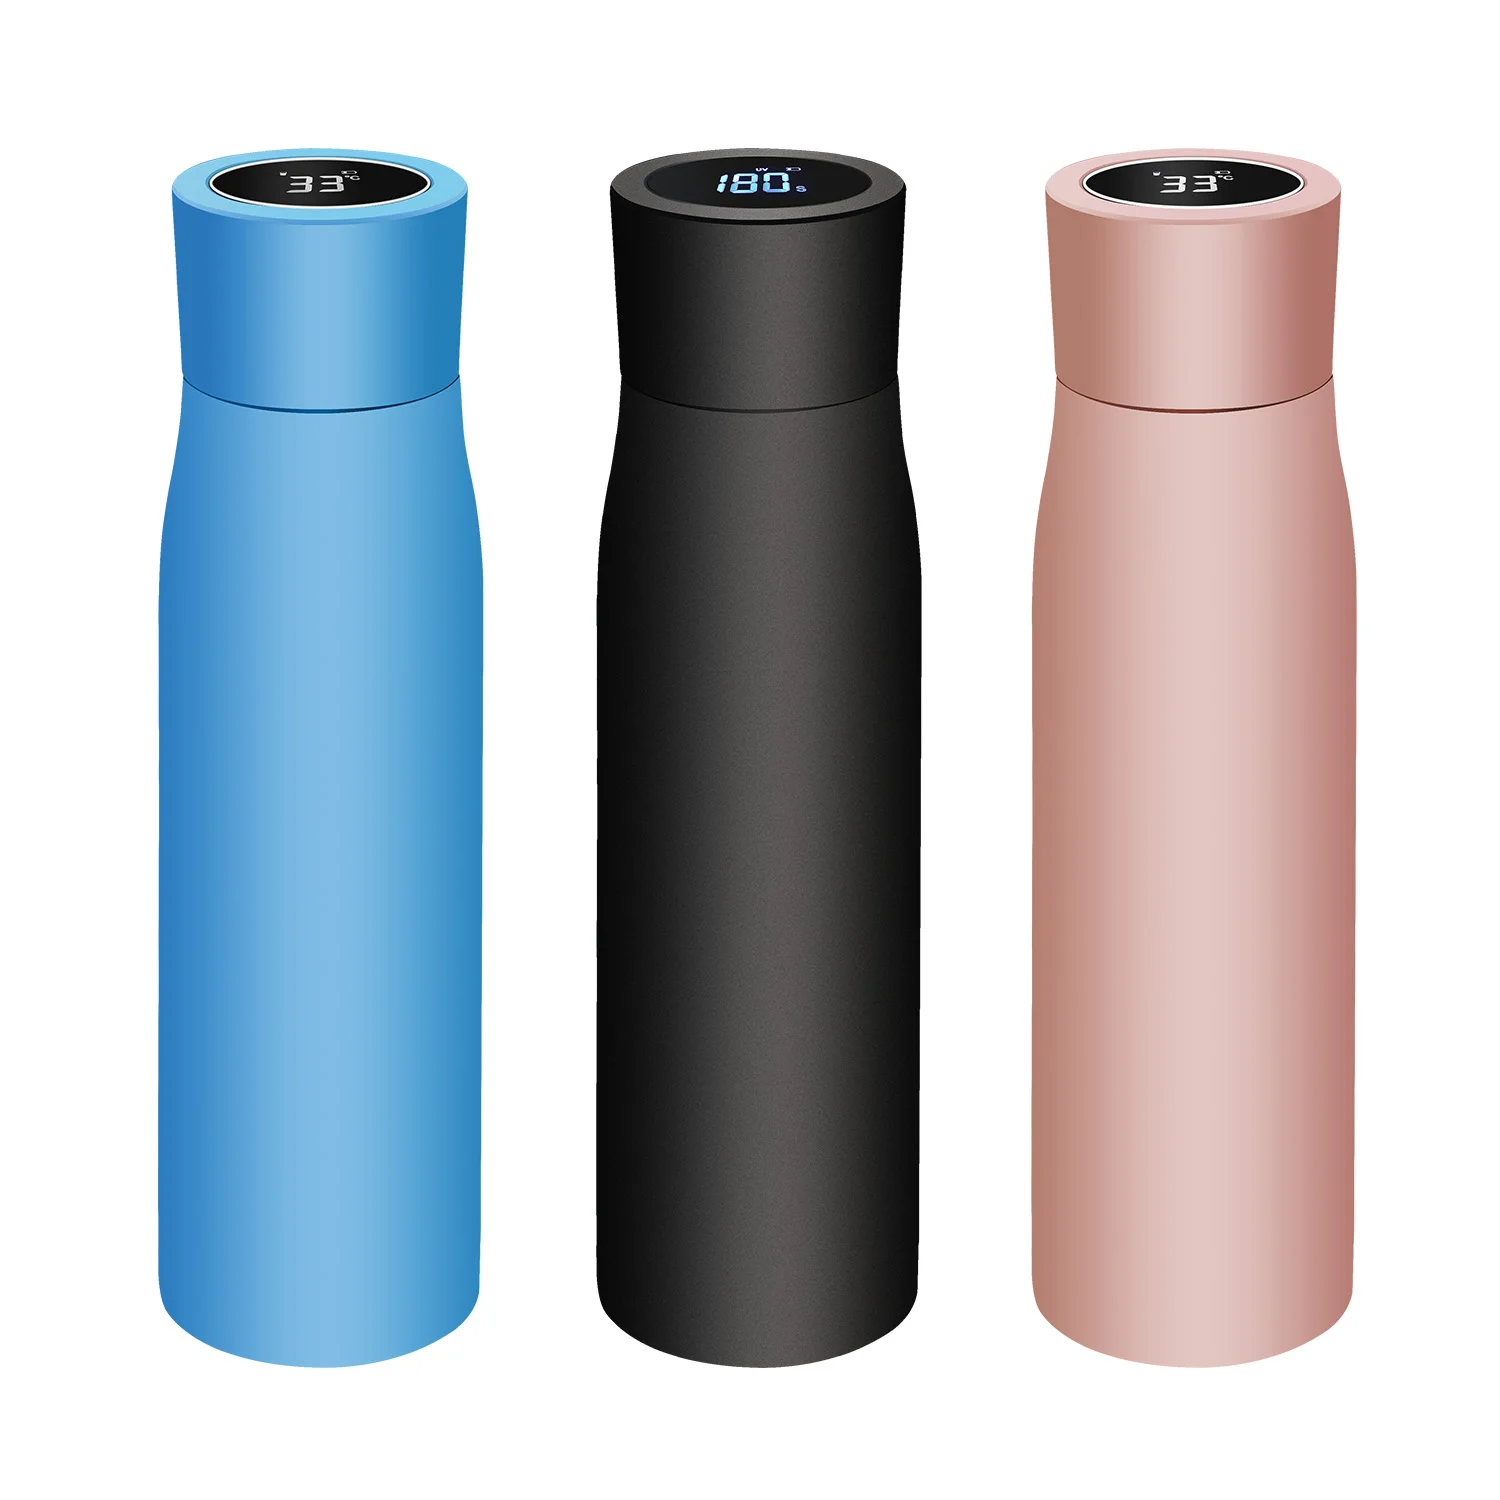 

500ml UV Light Temperature Display Water Bottle 316 Stainless Steel Vacuum Flask With Drink Water Reminder Smart